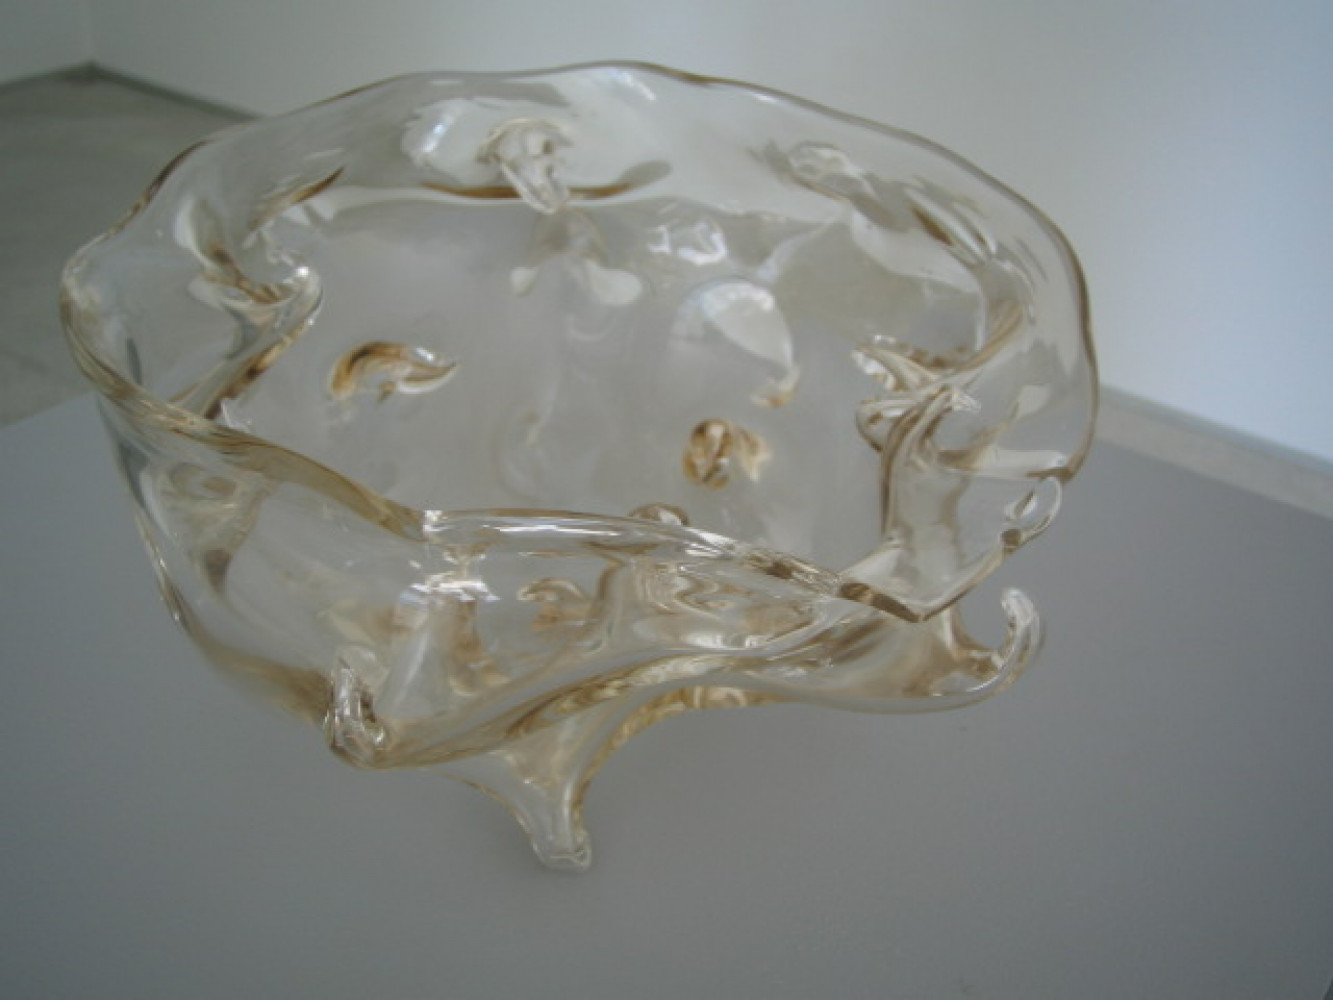 Tony Cragg, ‘Hungry Bowl’, 2009, Murano glass sculpture